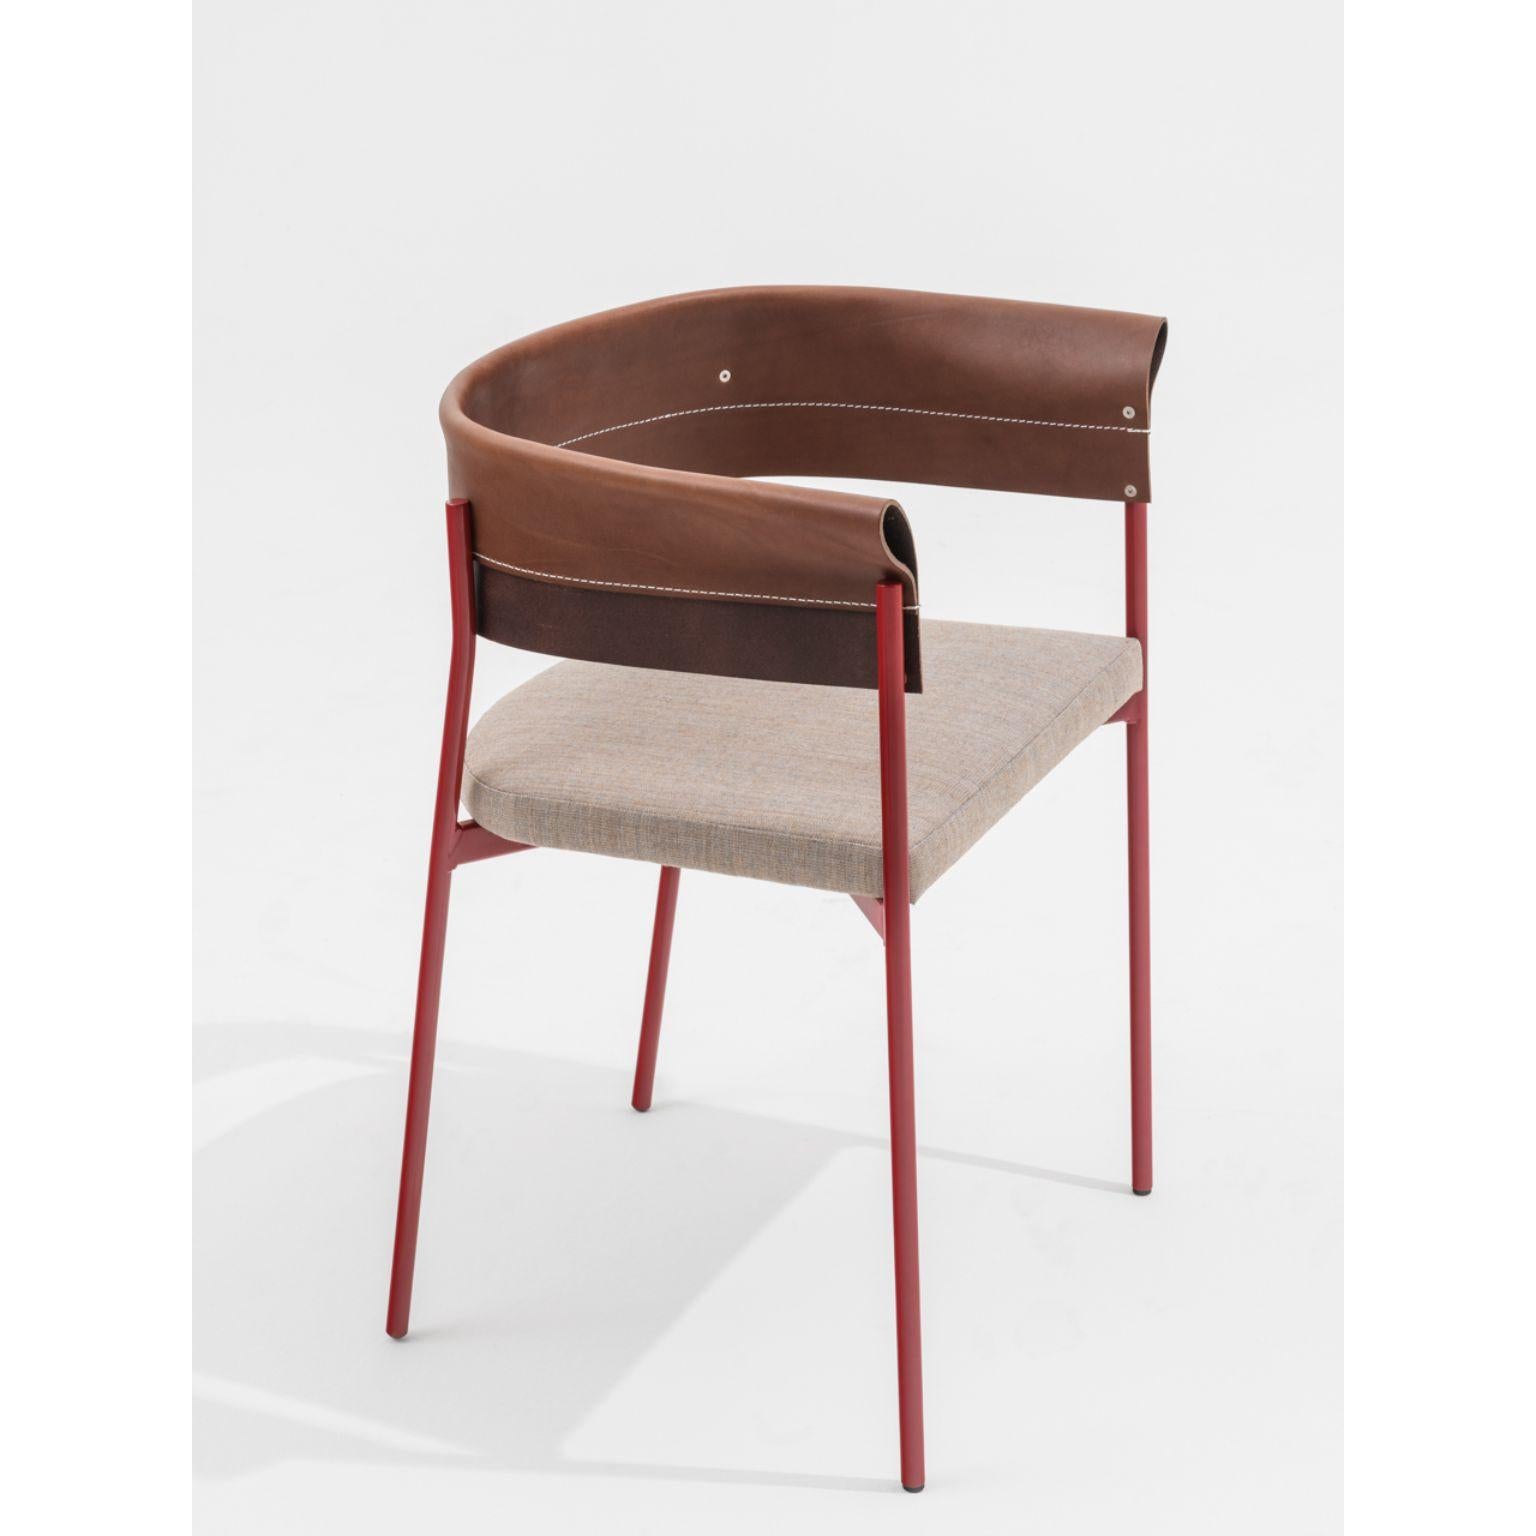 Gomito Chair by SEM
Dimensions: W54 x D45 x H75 cm
Material:Lacquered hand-welved steel frame in colours, Backrest in precious folded and sewn leather,Upholstered seat in fabric Canvas 2 by Kvadrat.
Also Available in different colours.

Gomito